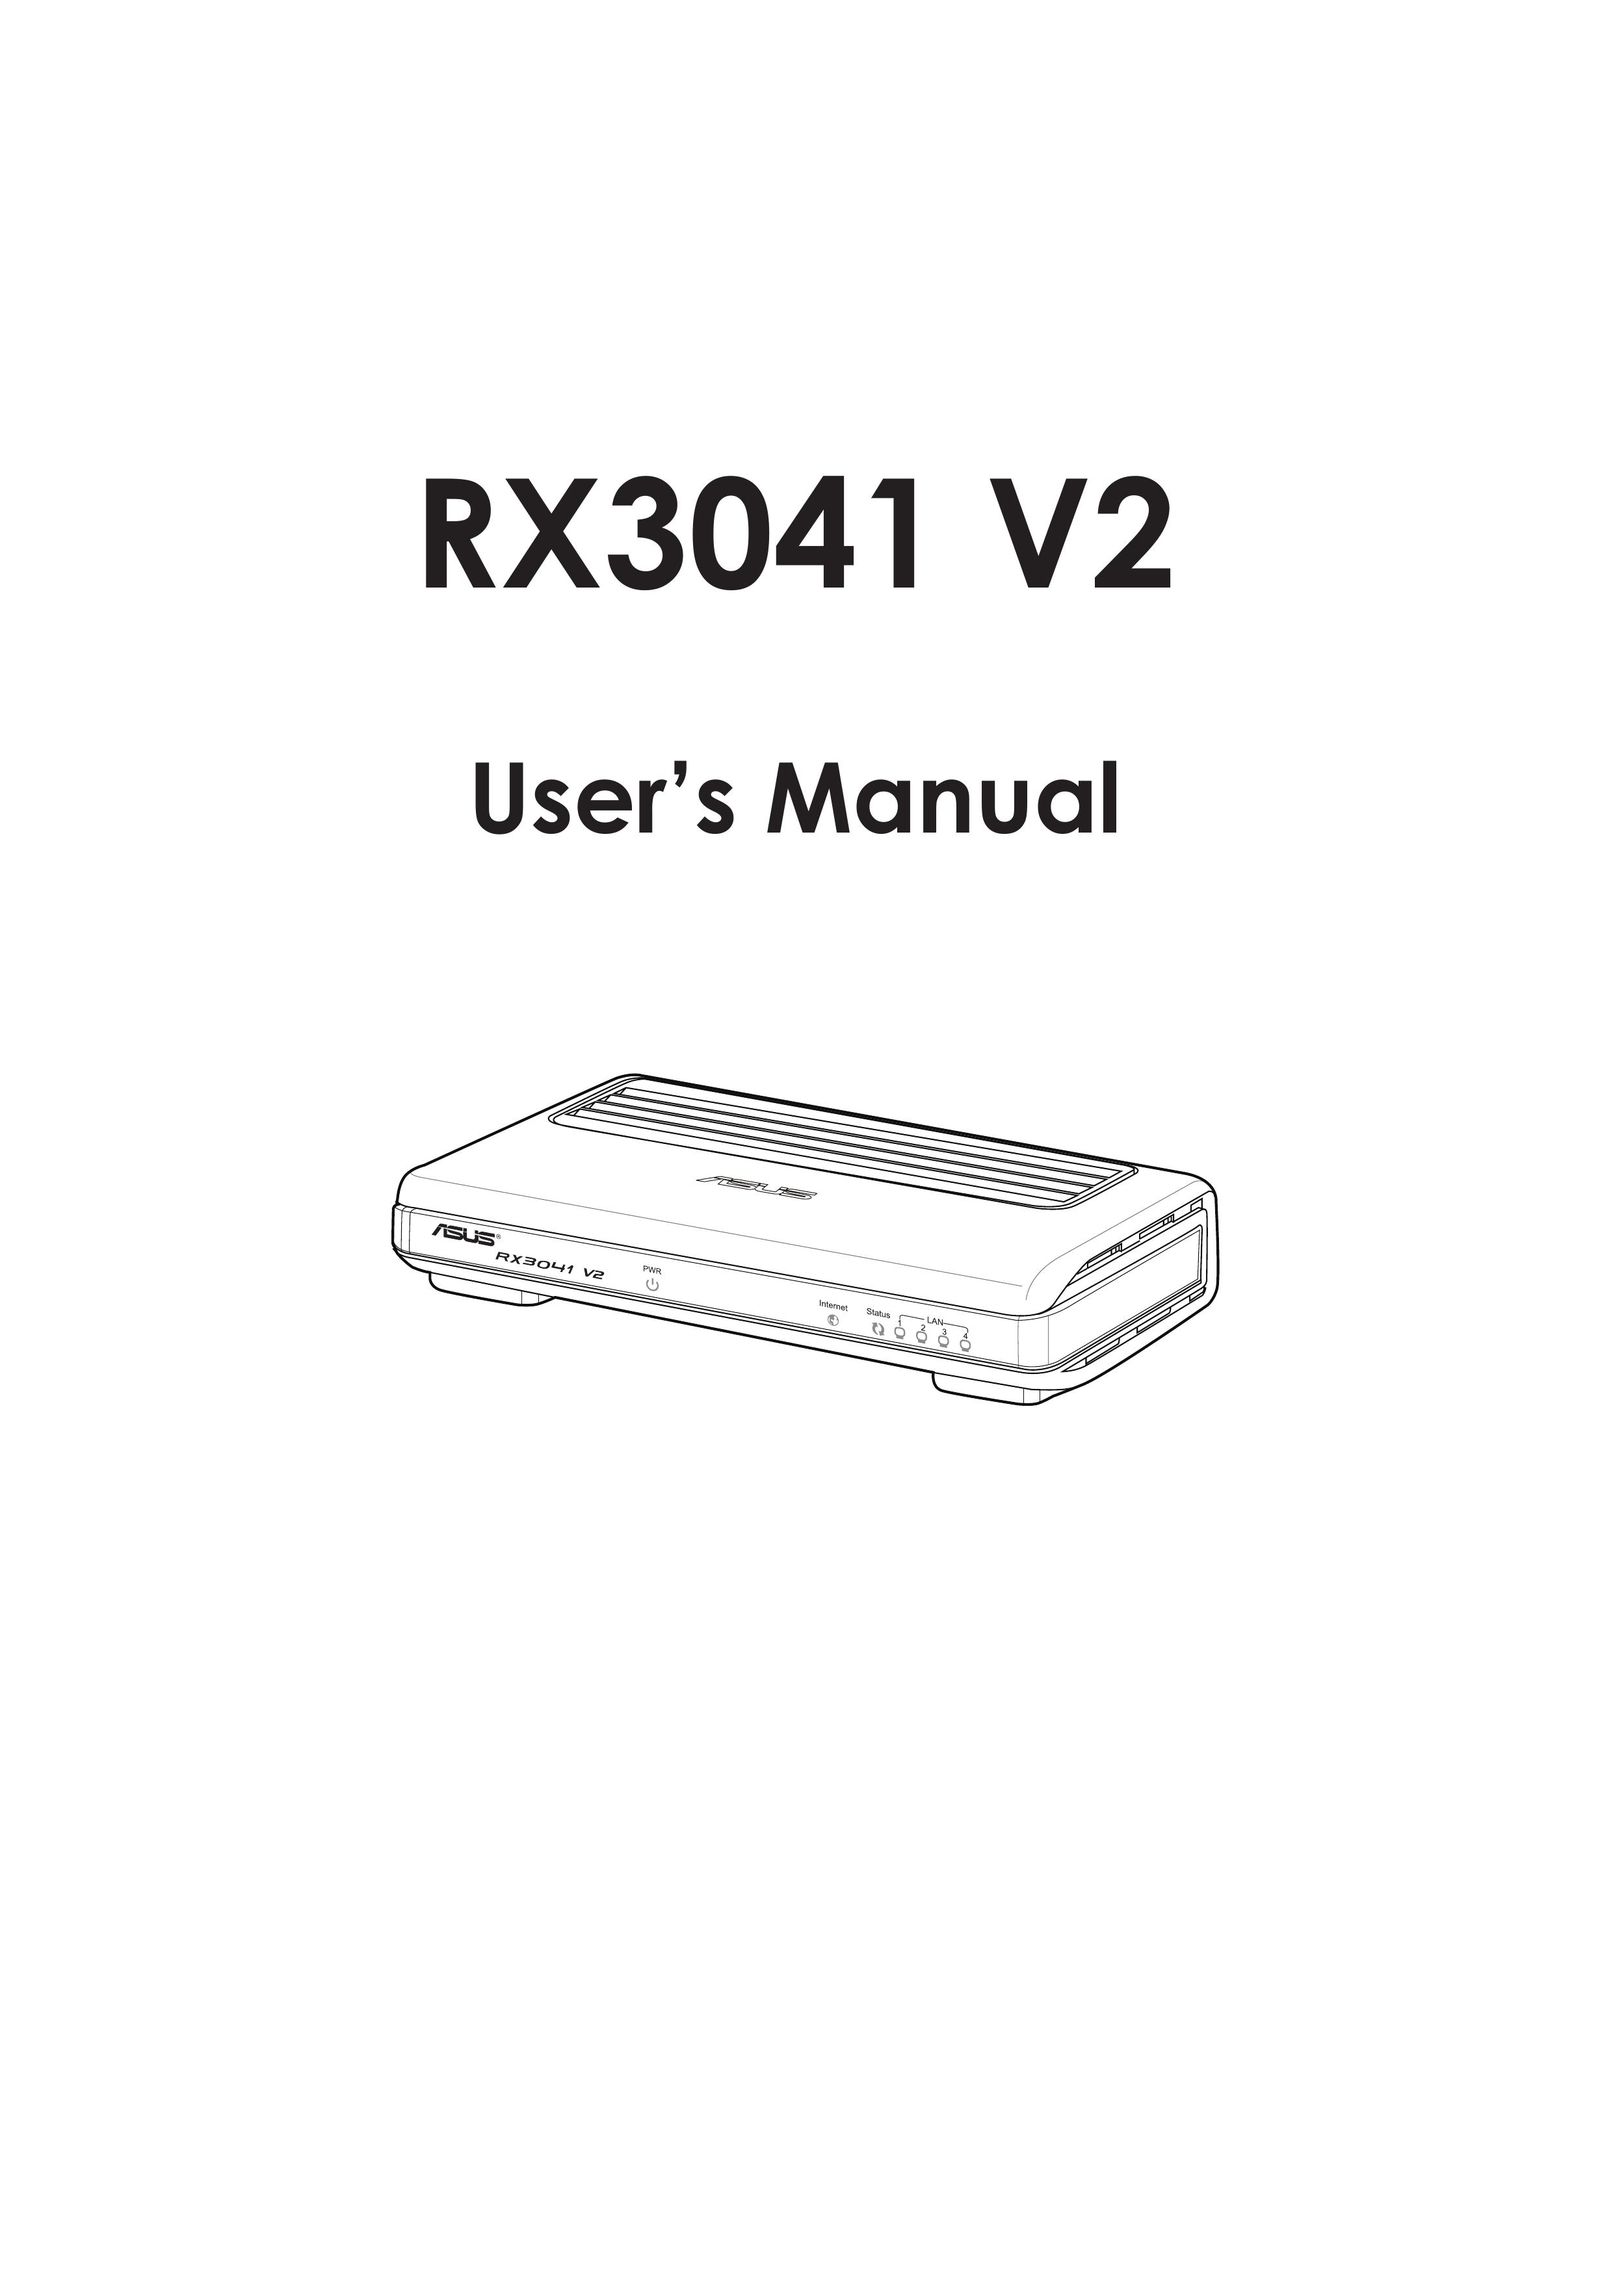 Asus RX3041 V2 Network Router User Manual